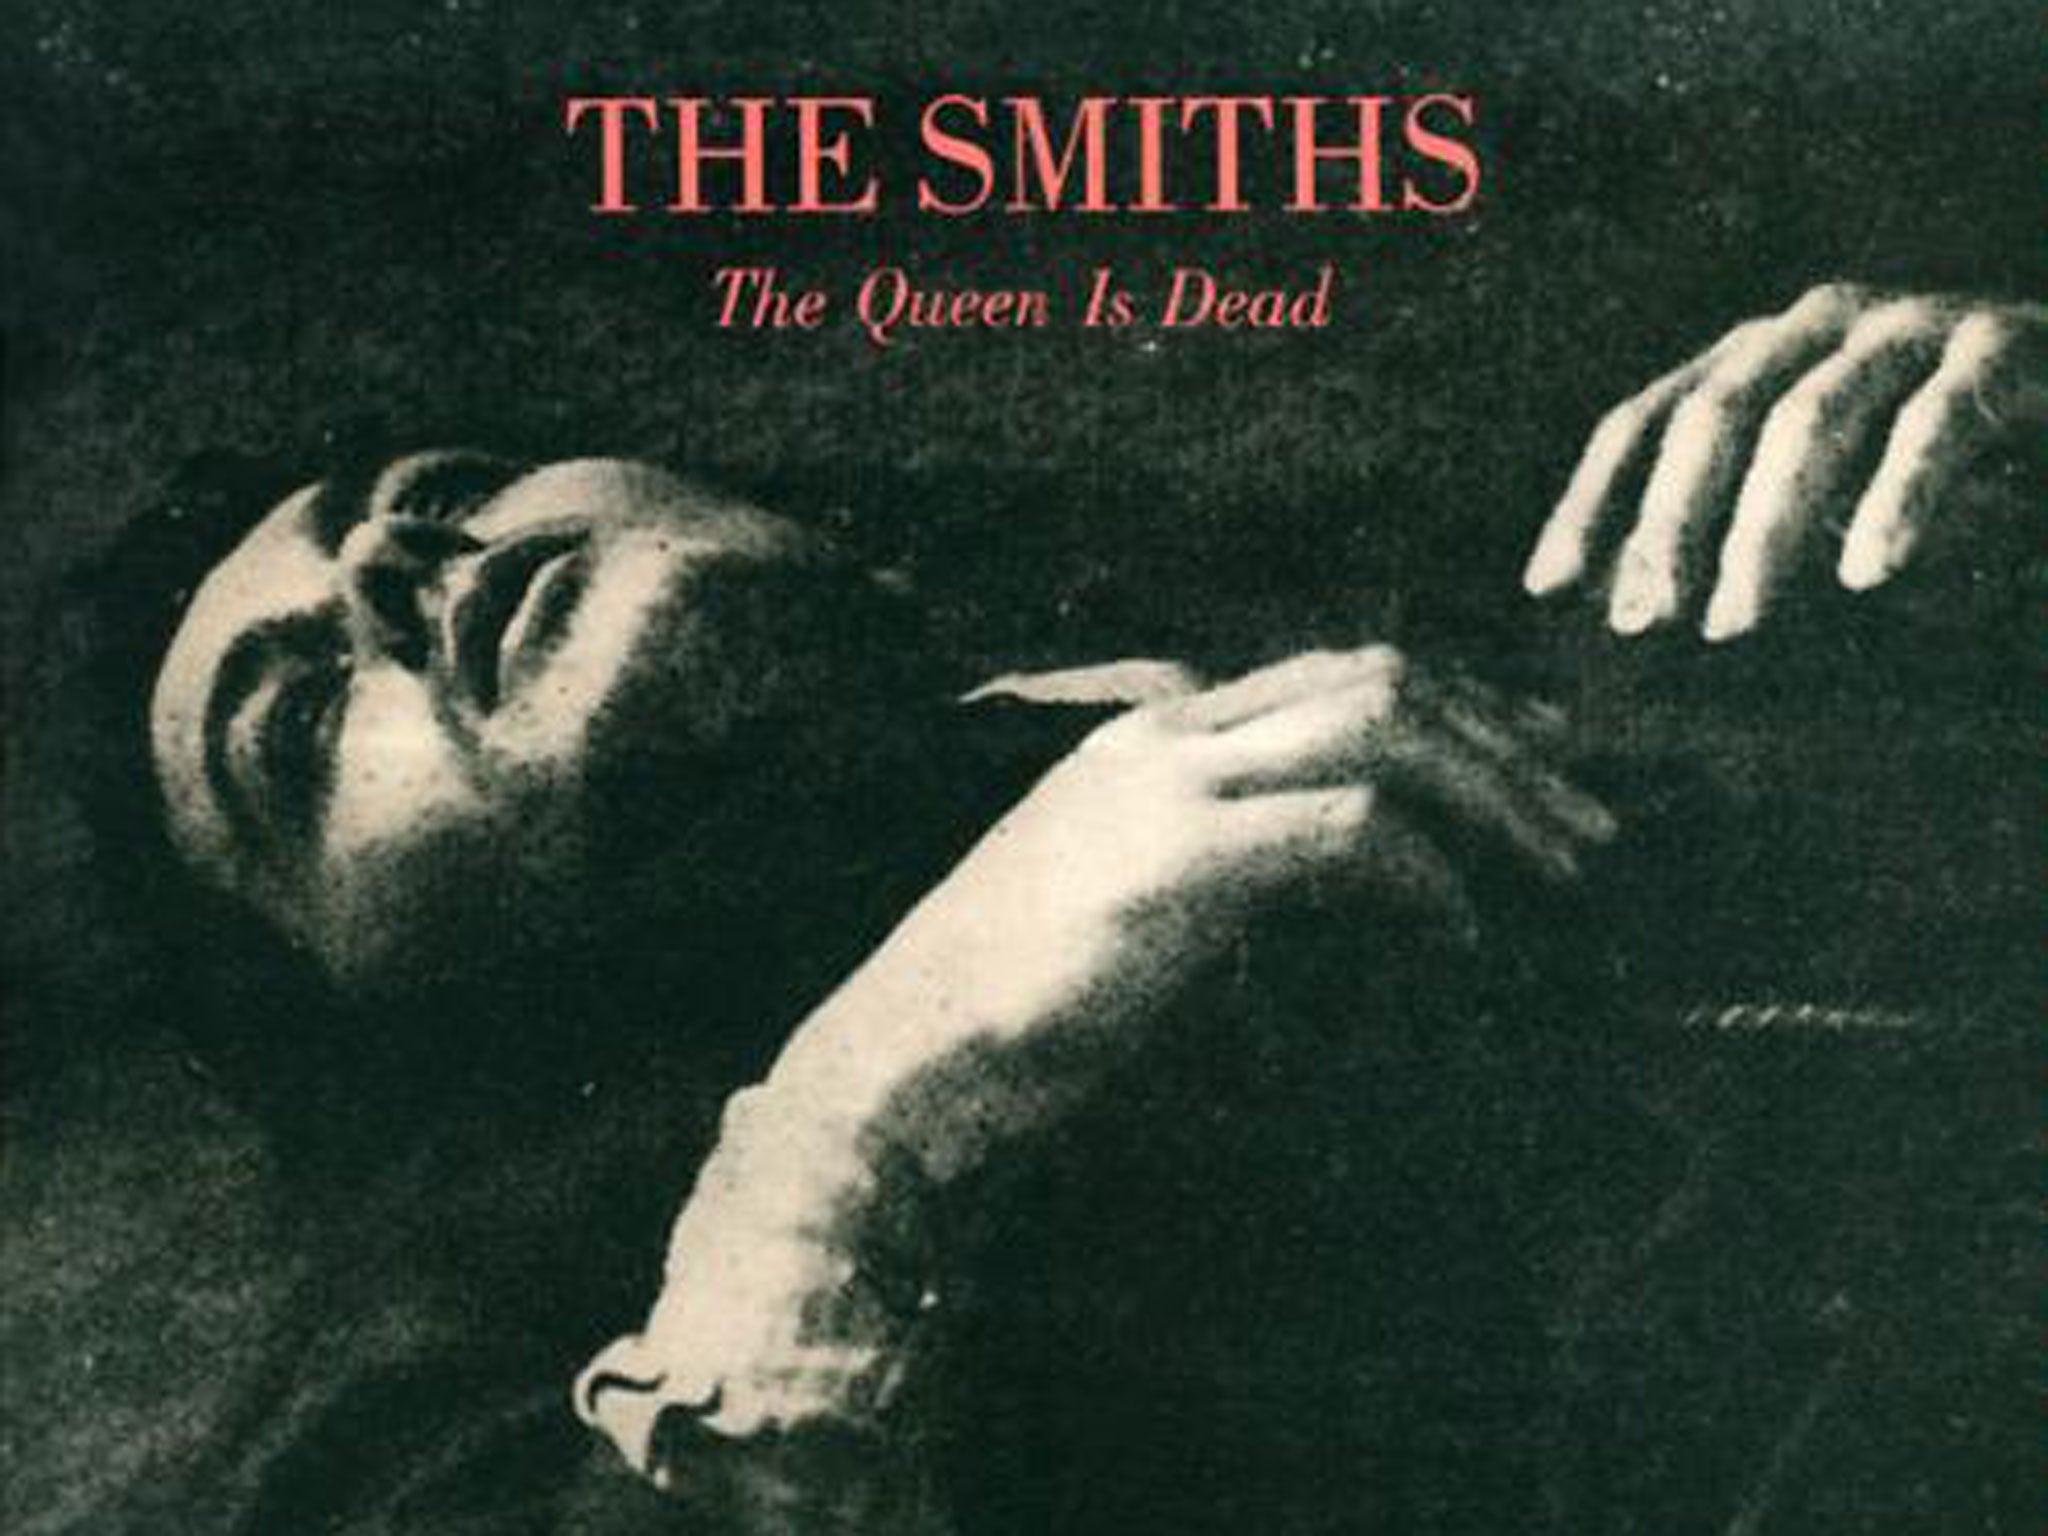 The Queen Is Dead by The Smiths has been named NME's greatest album of all time